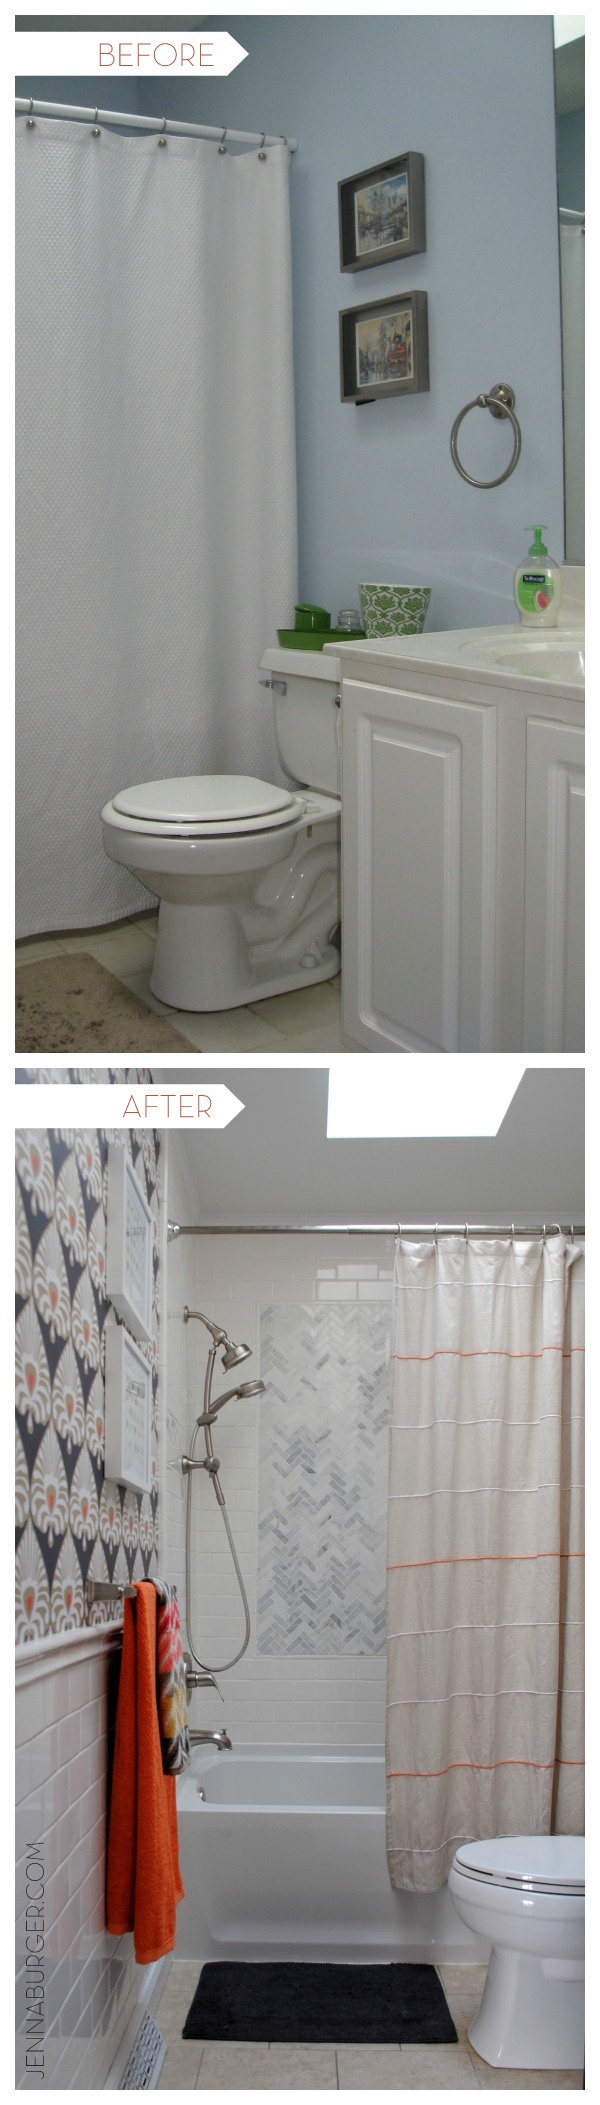 BEFORE & AFTER Bathroom Makover with 95% of the space being a DIY project - new tub + tile, vanity, wallpaper, and more!  Lots of details on this multi-post before & after.  Bathroom makeover by Jenna Burger Design www.jennaburger.com